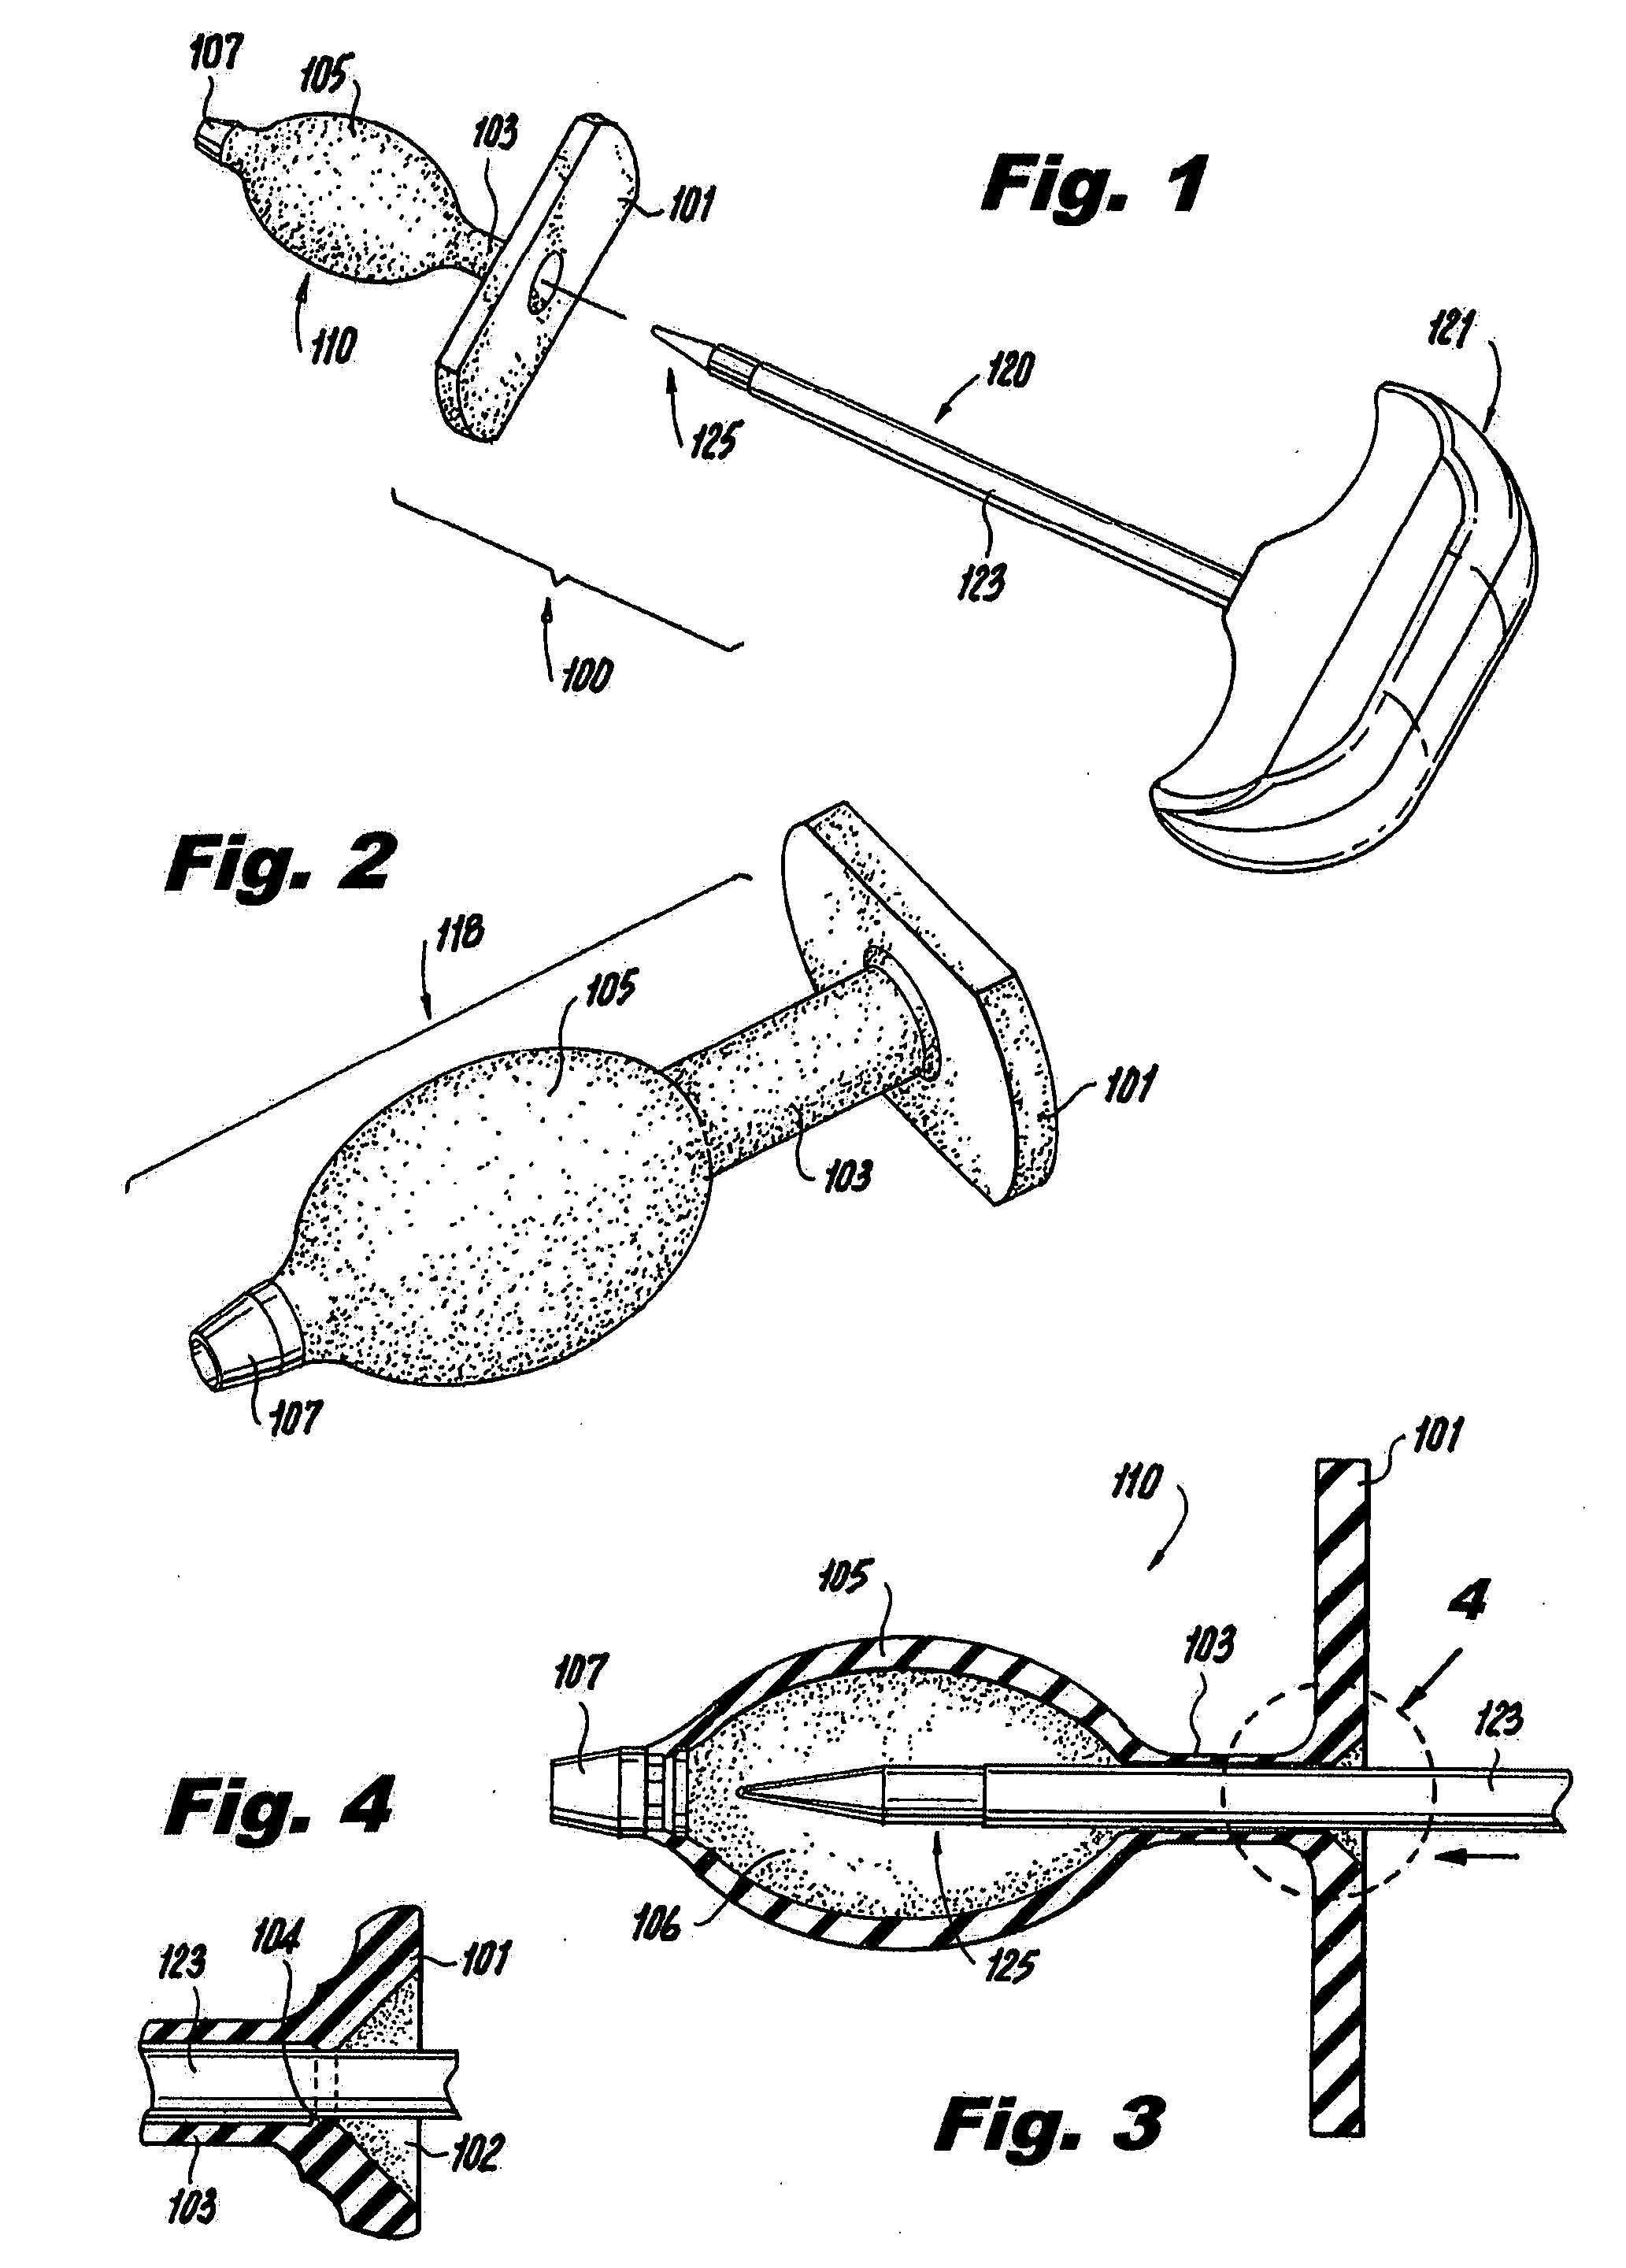 Elastically deformable surgical access device having telescoping guide tube